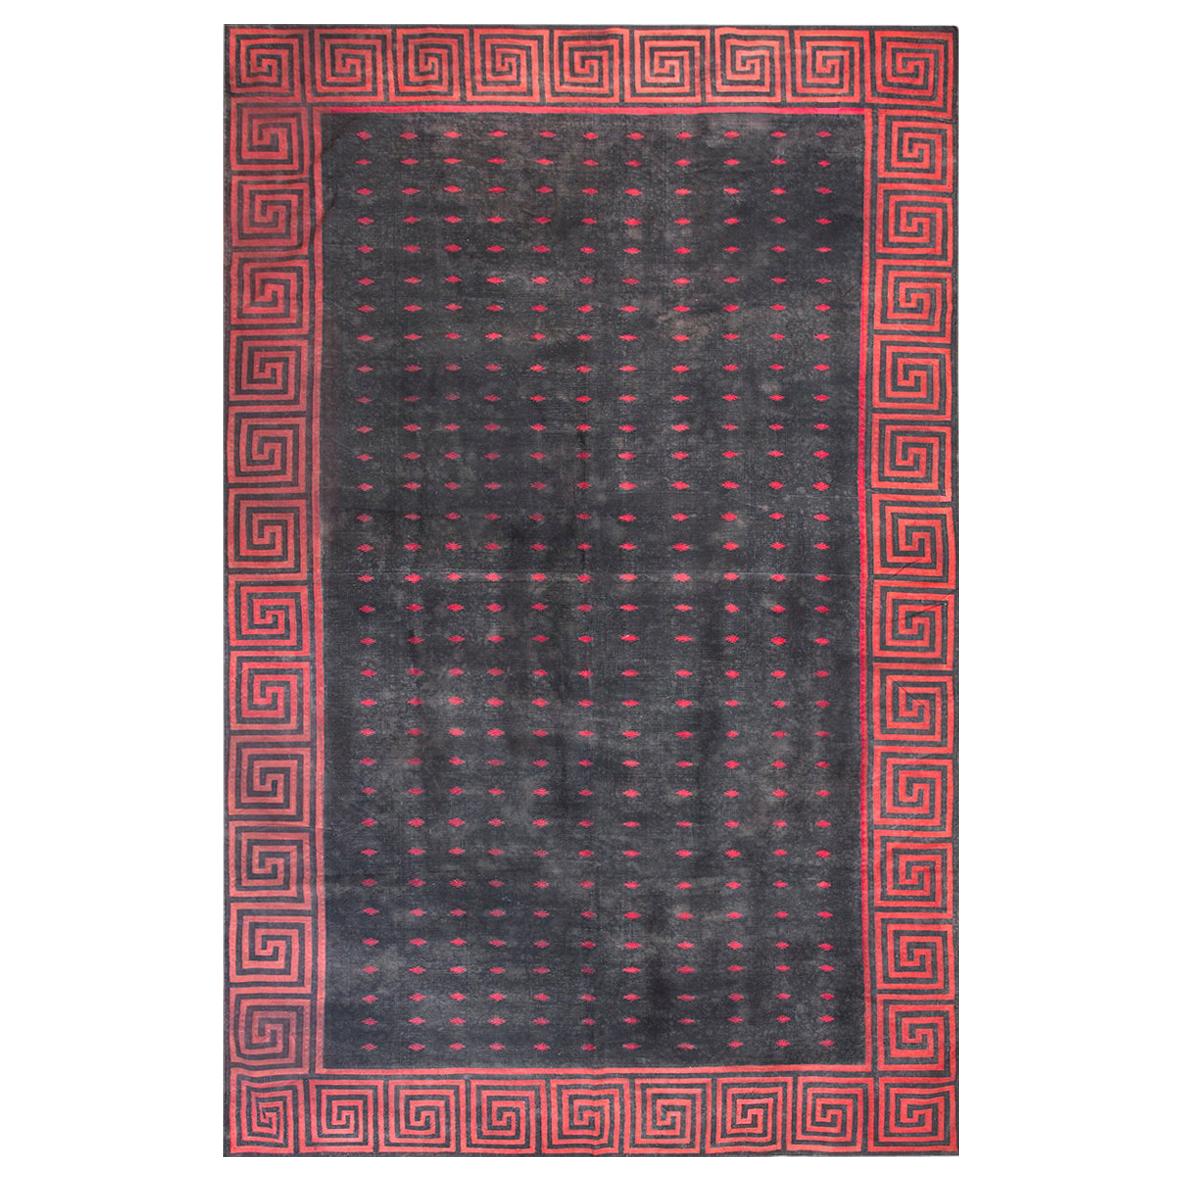 Early 20th Century Indian Cotton Dhurrie Carpet ( 8'3" X 12'9" - 252 X 388 ) For Sale